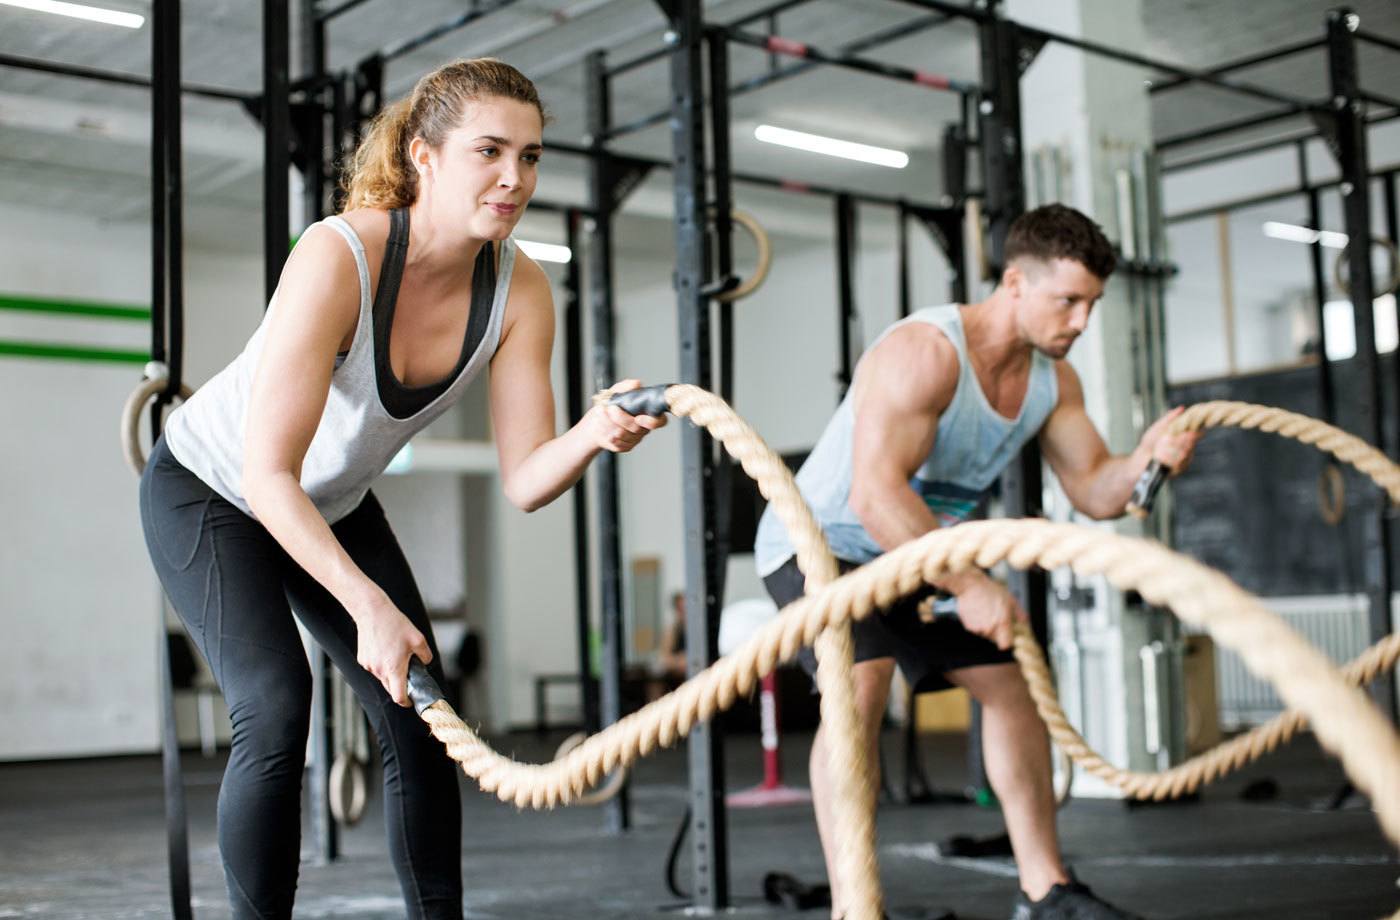 An intense rope workout leaves you sweaty from head to toe